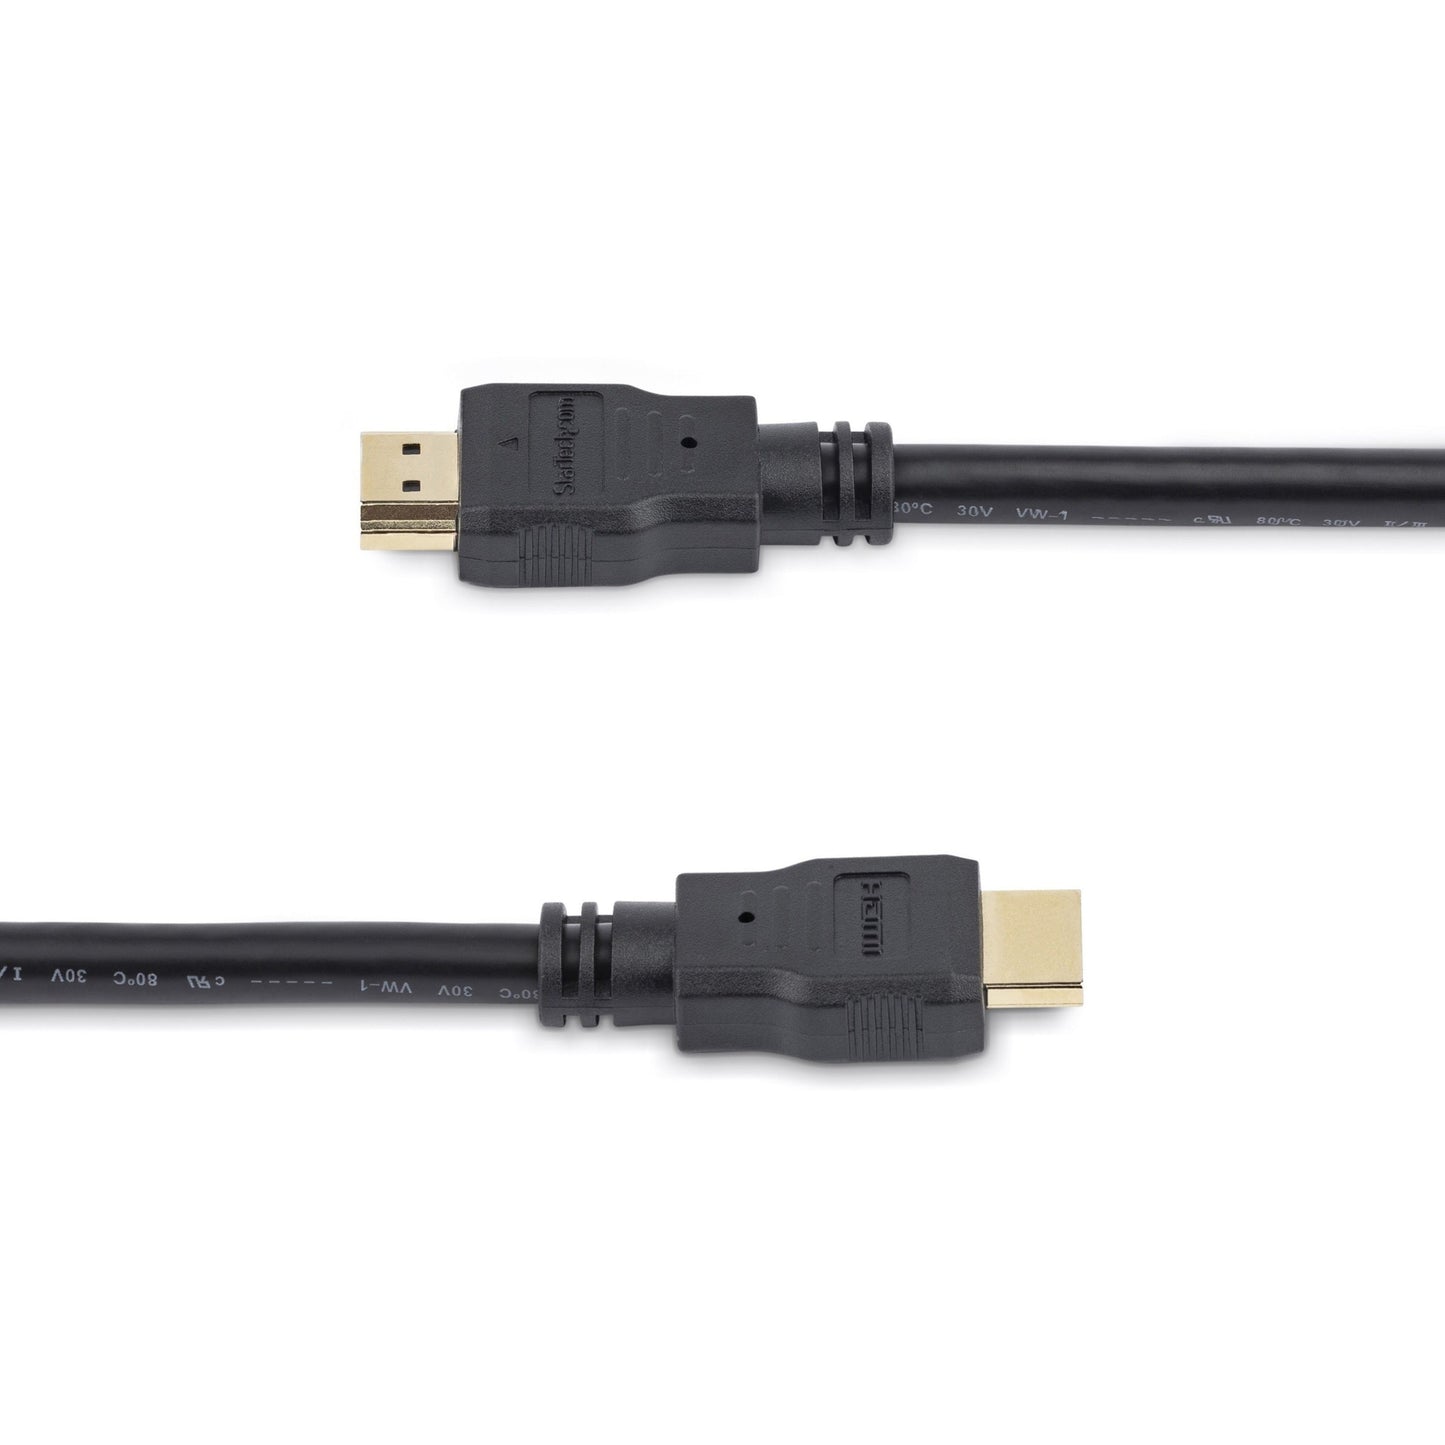 StarTech.com 1.5m High Speed HDMI Cable - Ultra HD 4k x 2k HDMI Cable - HDMI to HDMI M/M